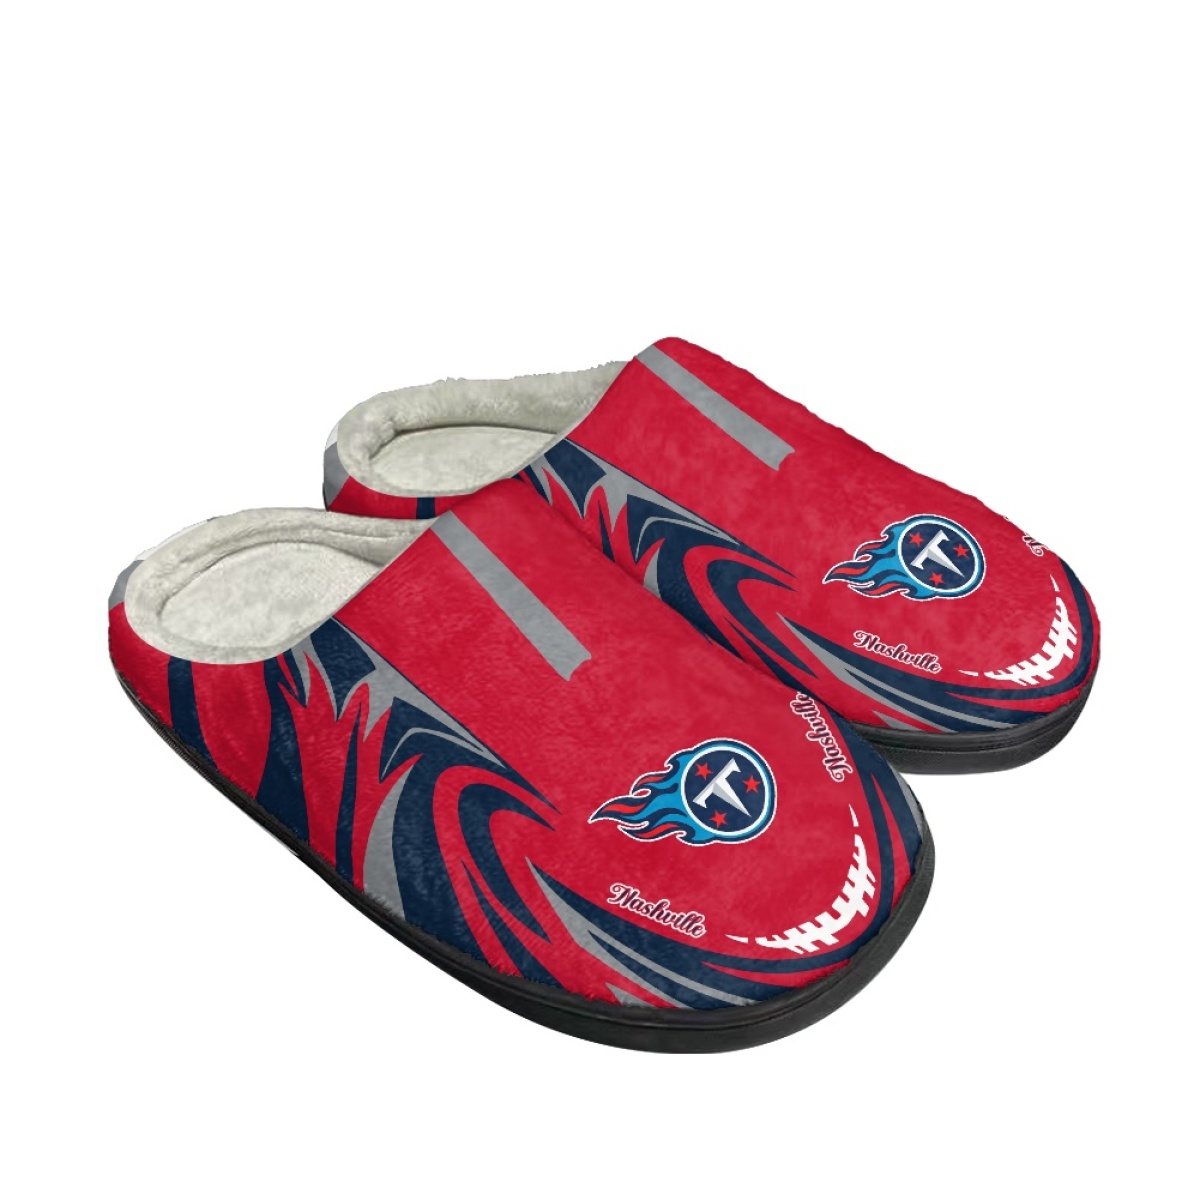 Women's Tennessee Titans Slippers/Shoes 004